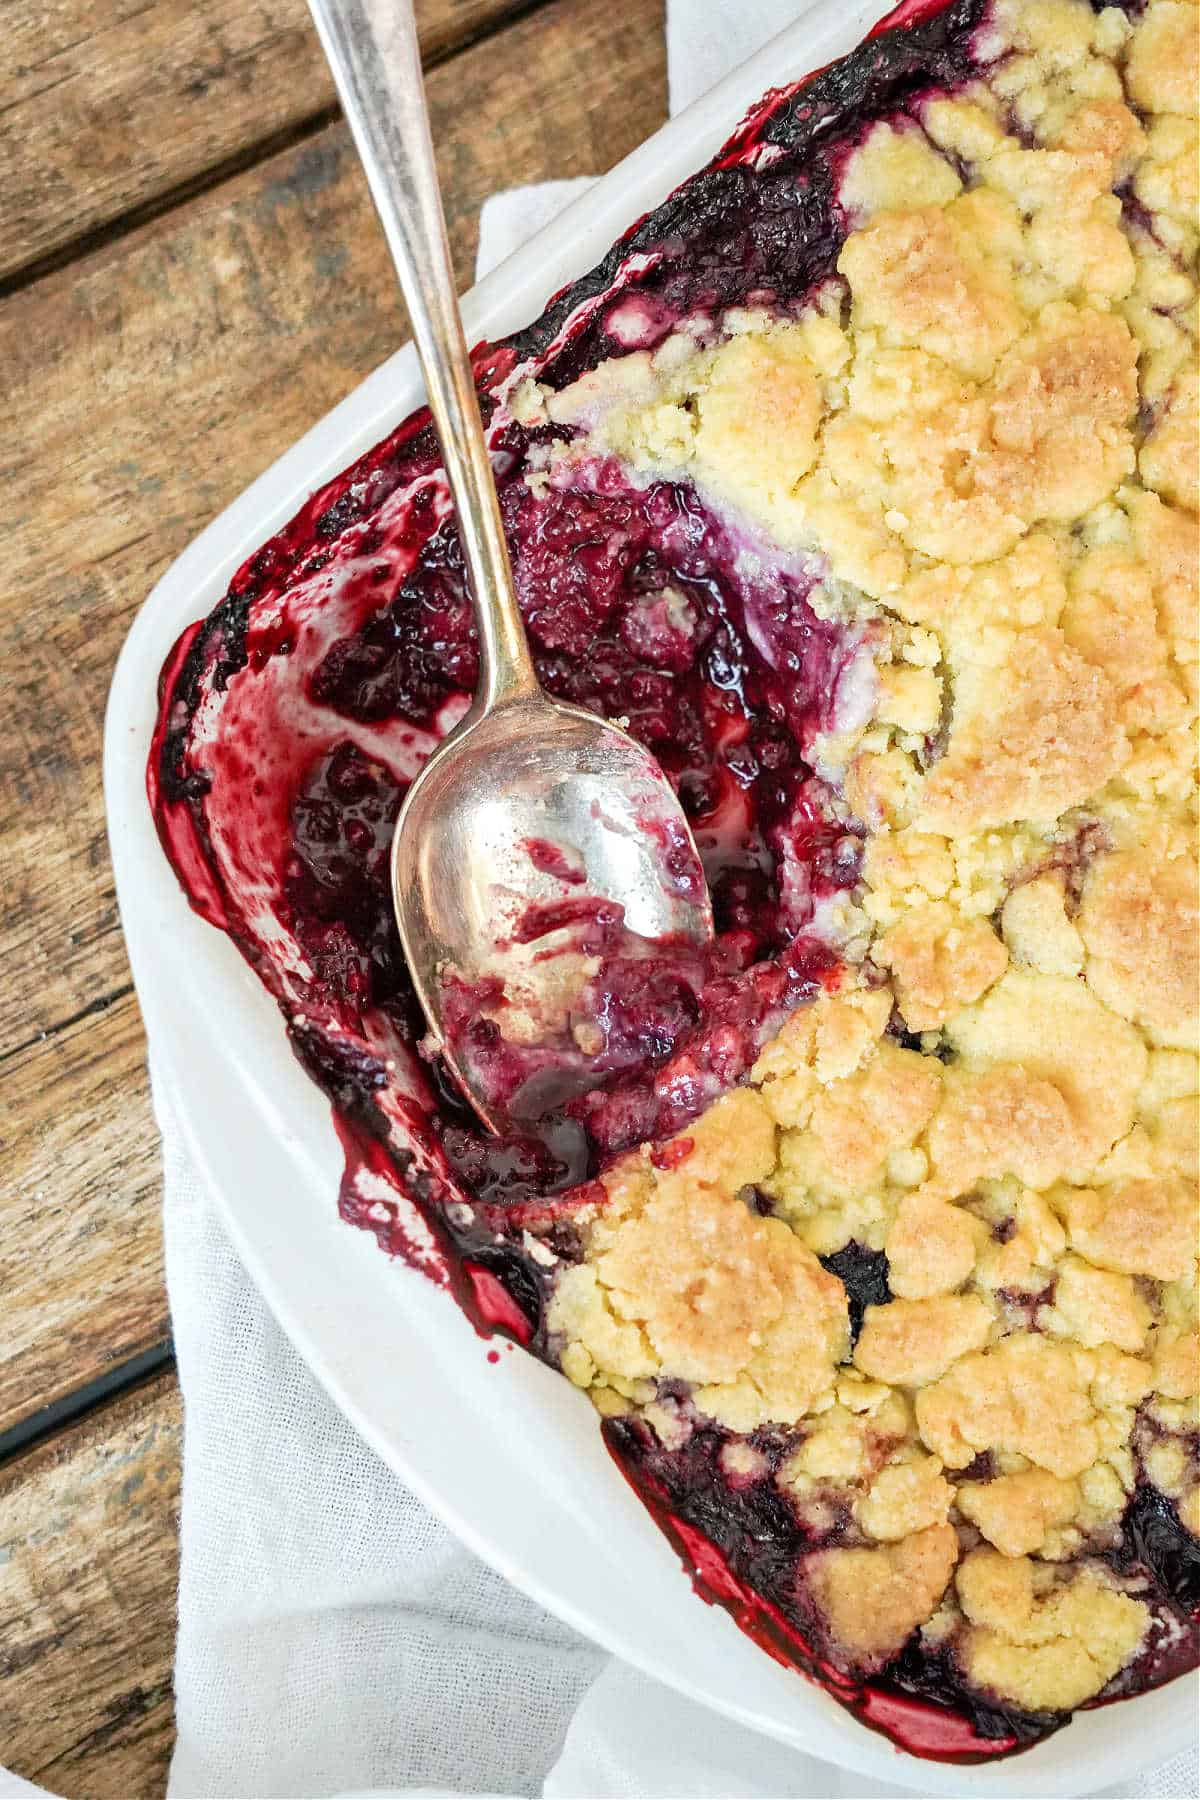 Silver spoon in a white dish with berry dump cake. Wooden table, white linen.